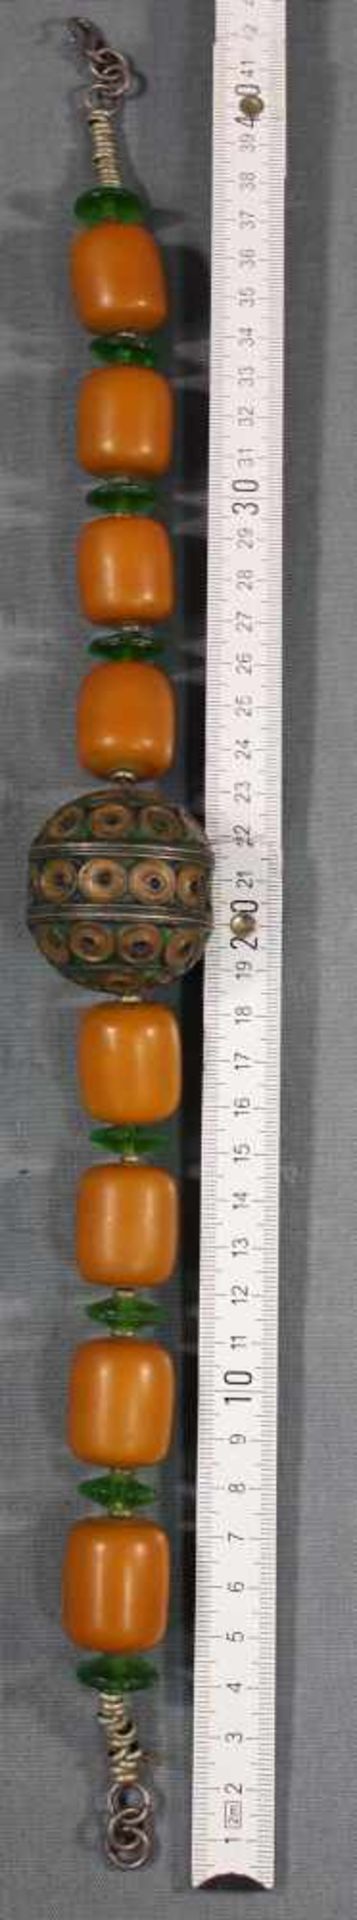 Amber necklace with metal main ball and green glass spacers - Image 4 of 5